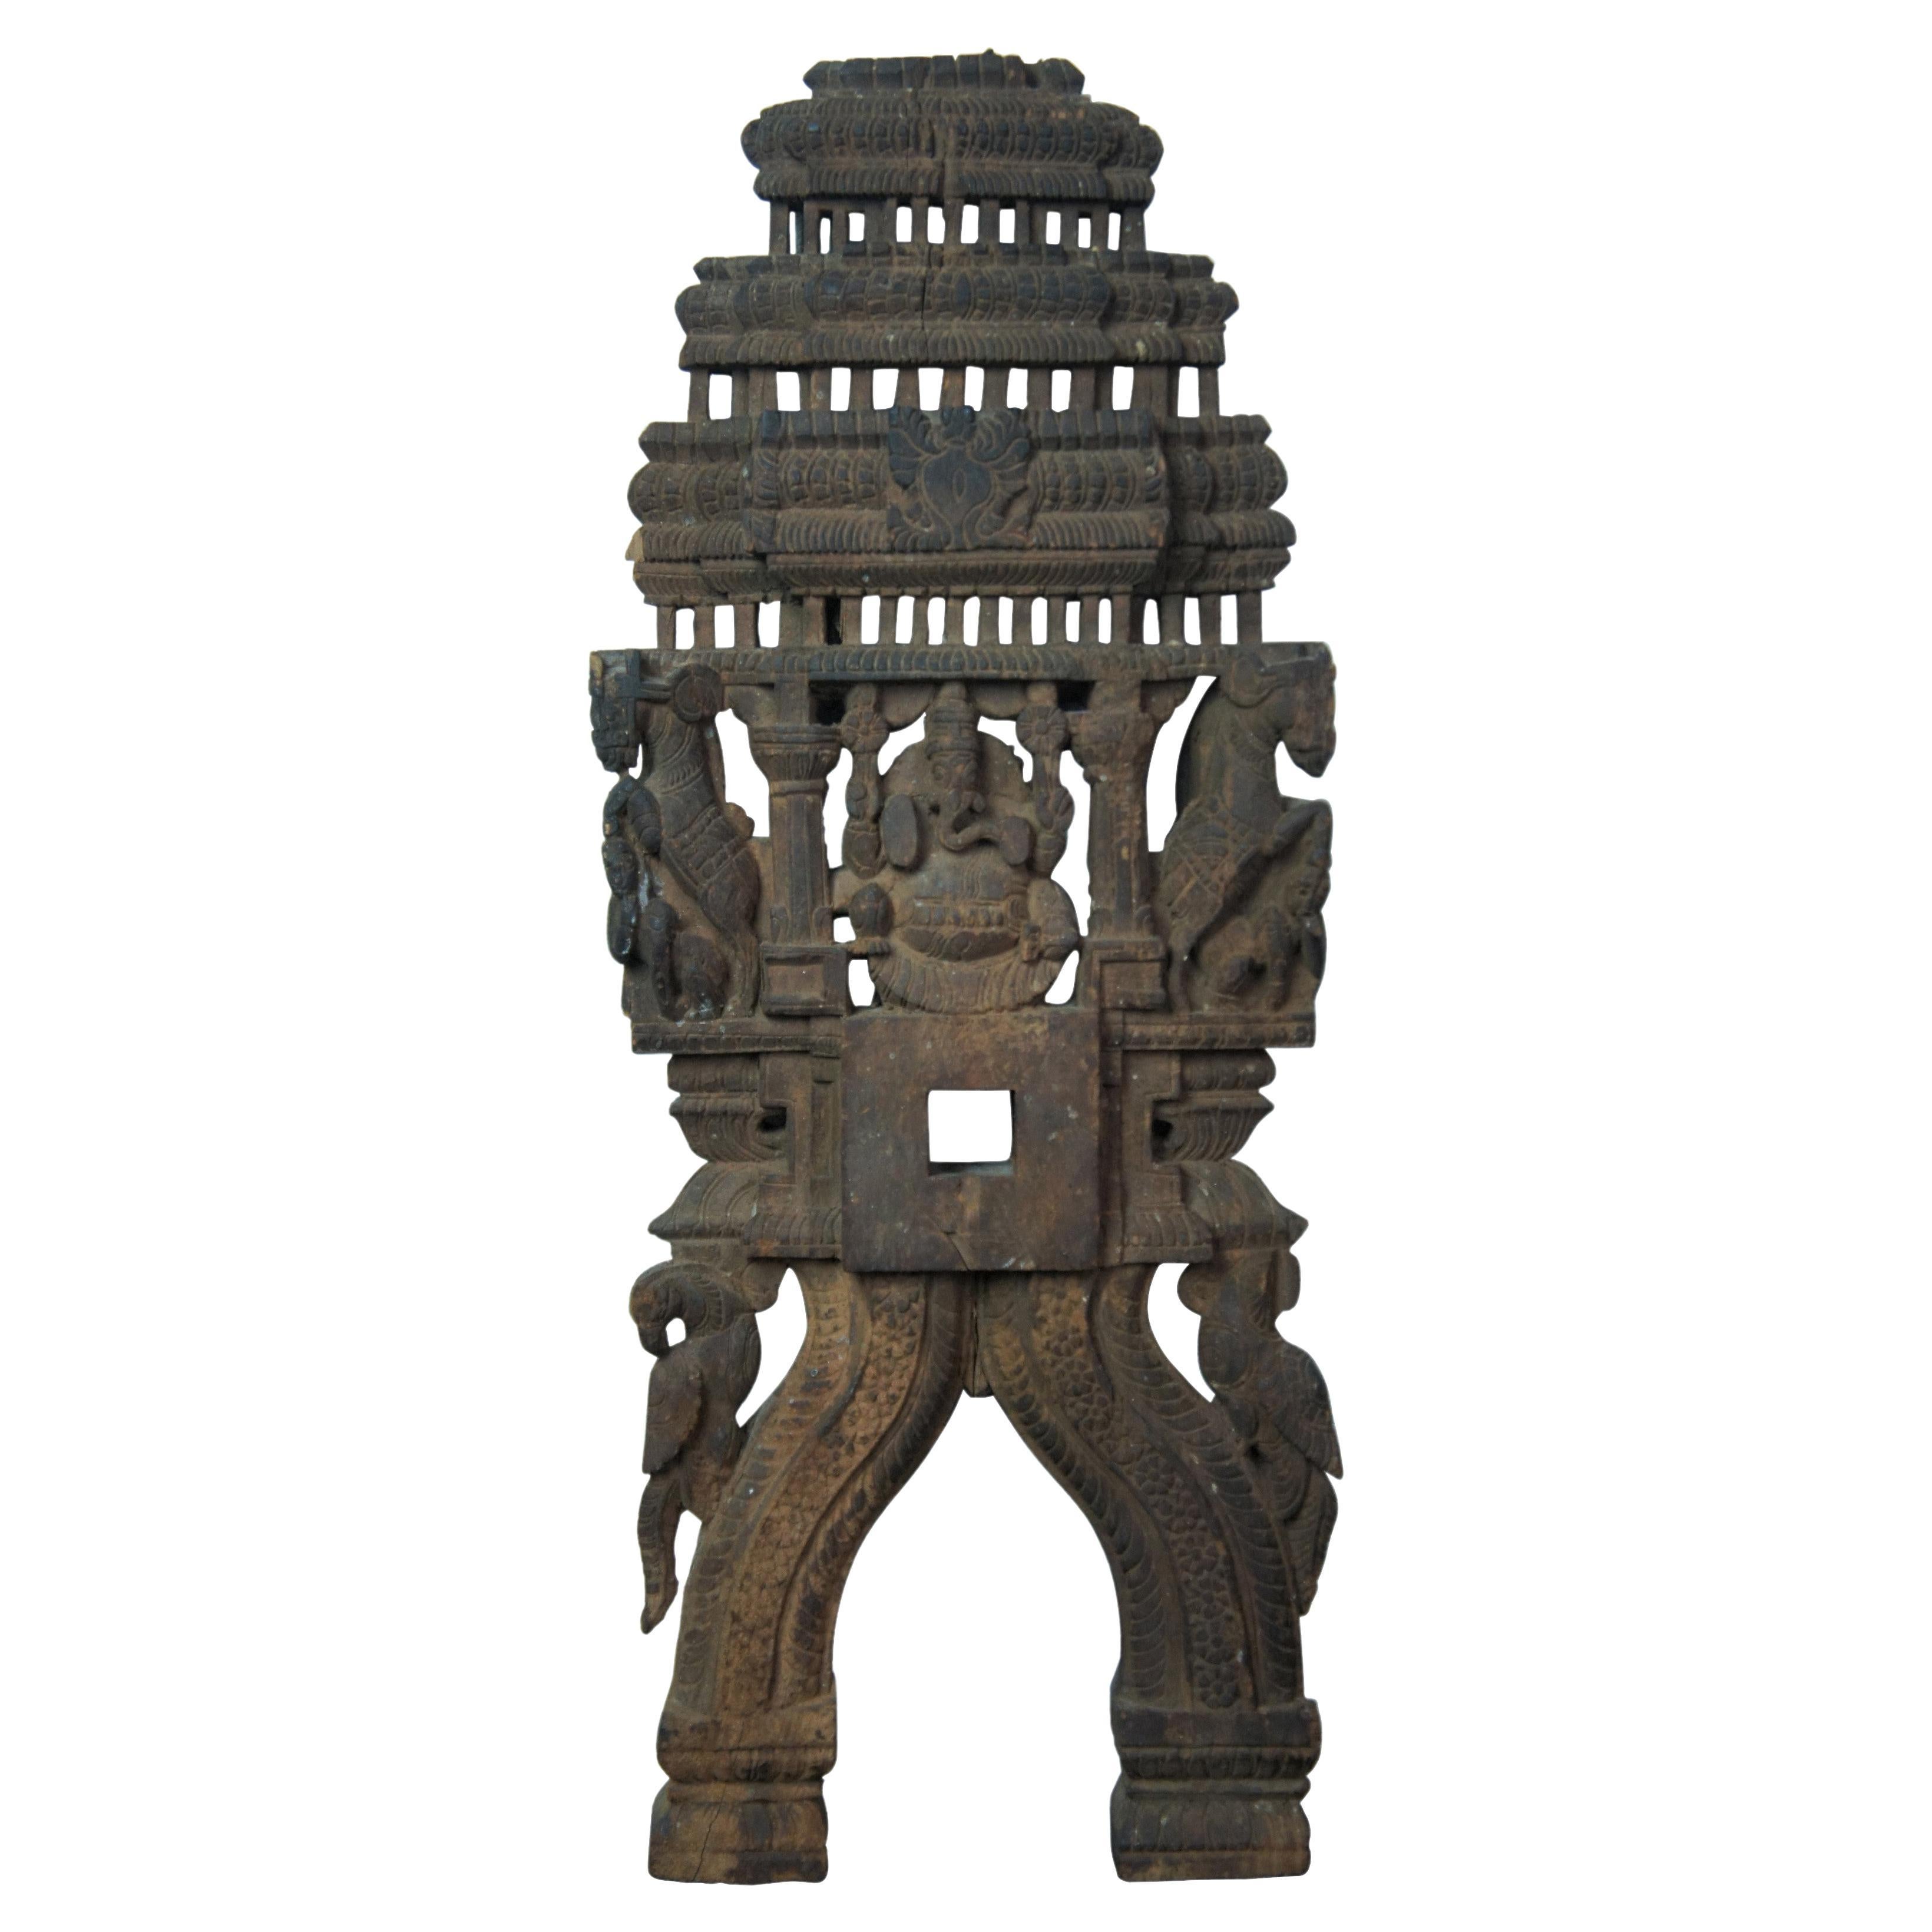 Antique Carved Wooden Hanging Hindu Temple Lord Ganesha Deity Plaque For Sale